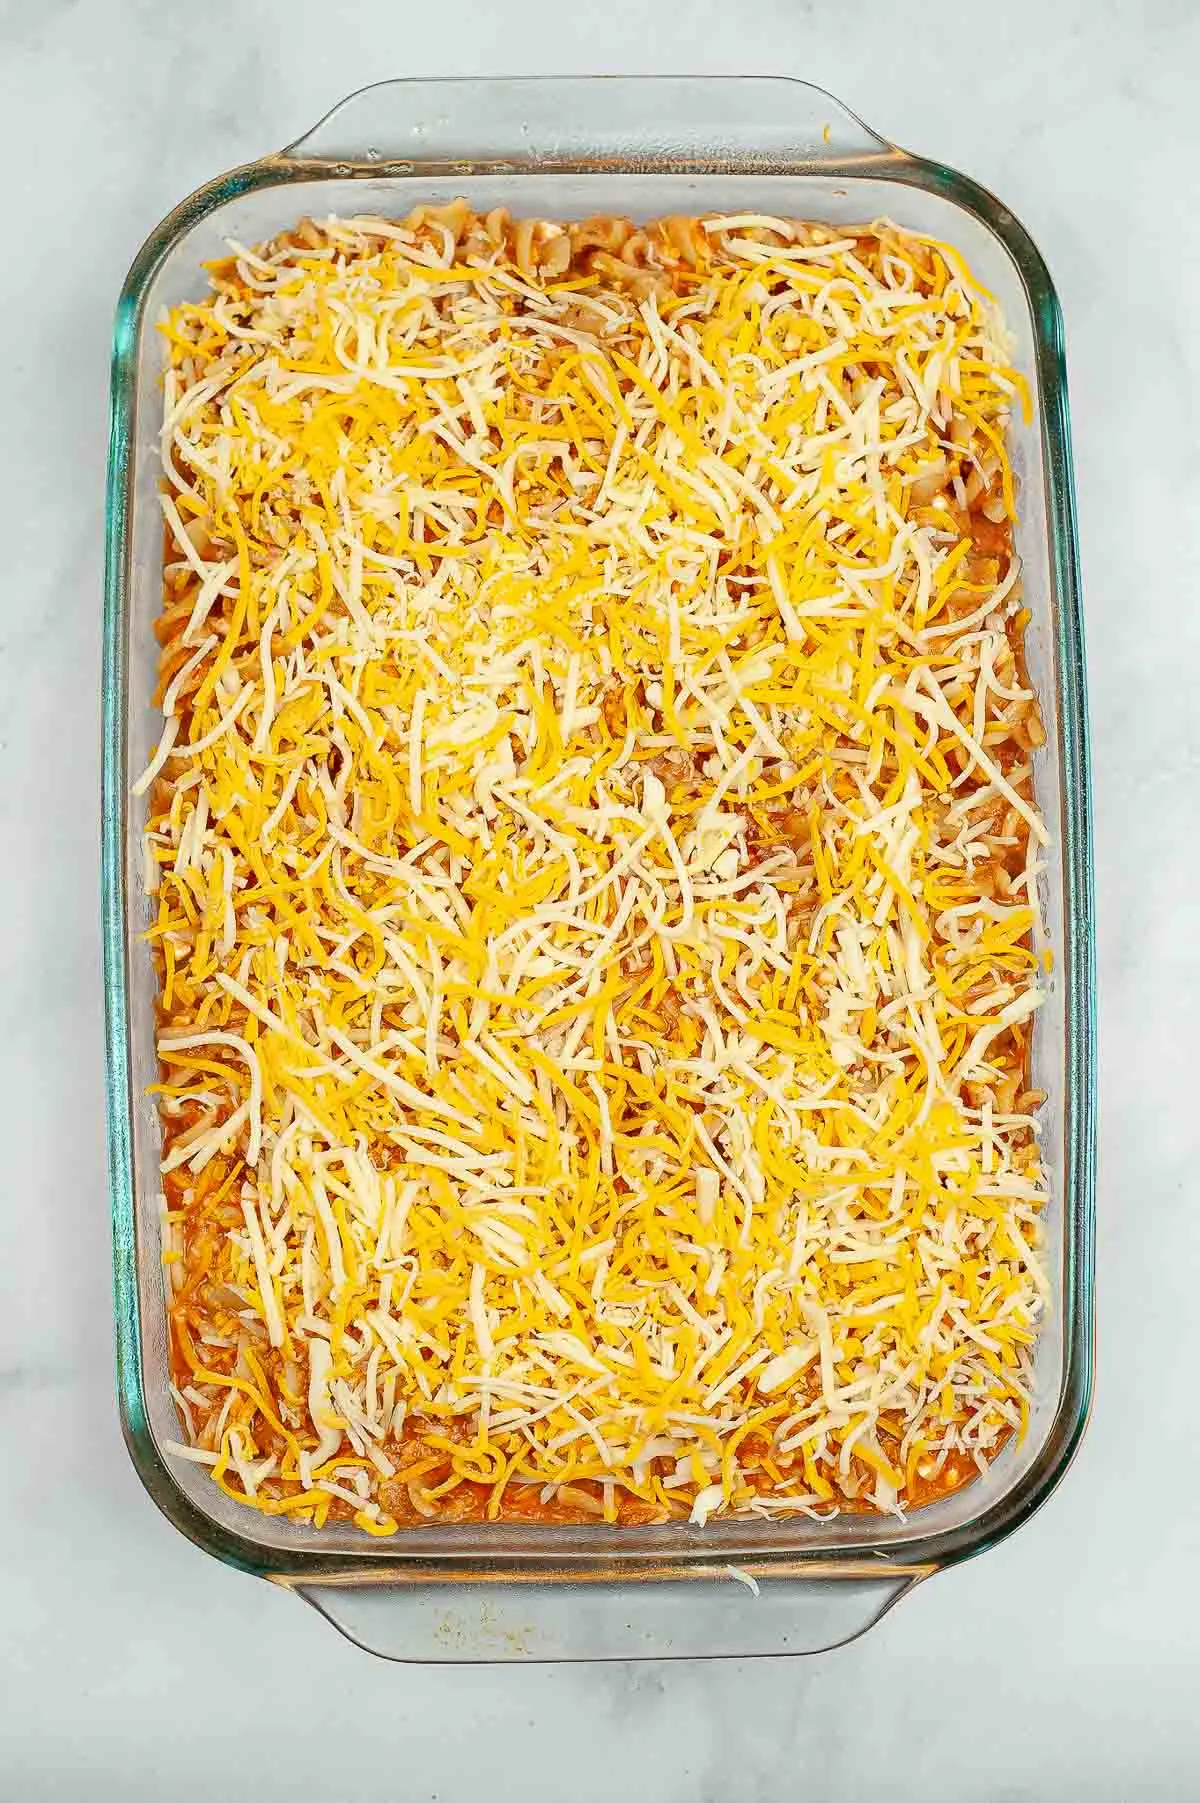 Pasta mixed with sauce and ricotta topped with shredded cheese in a baking dish.